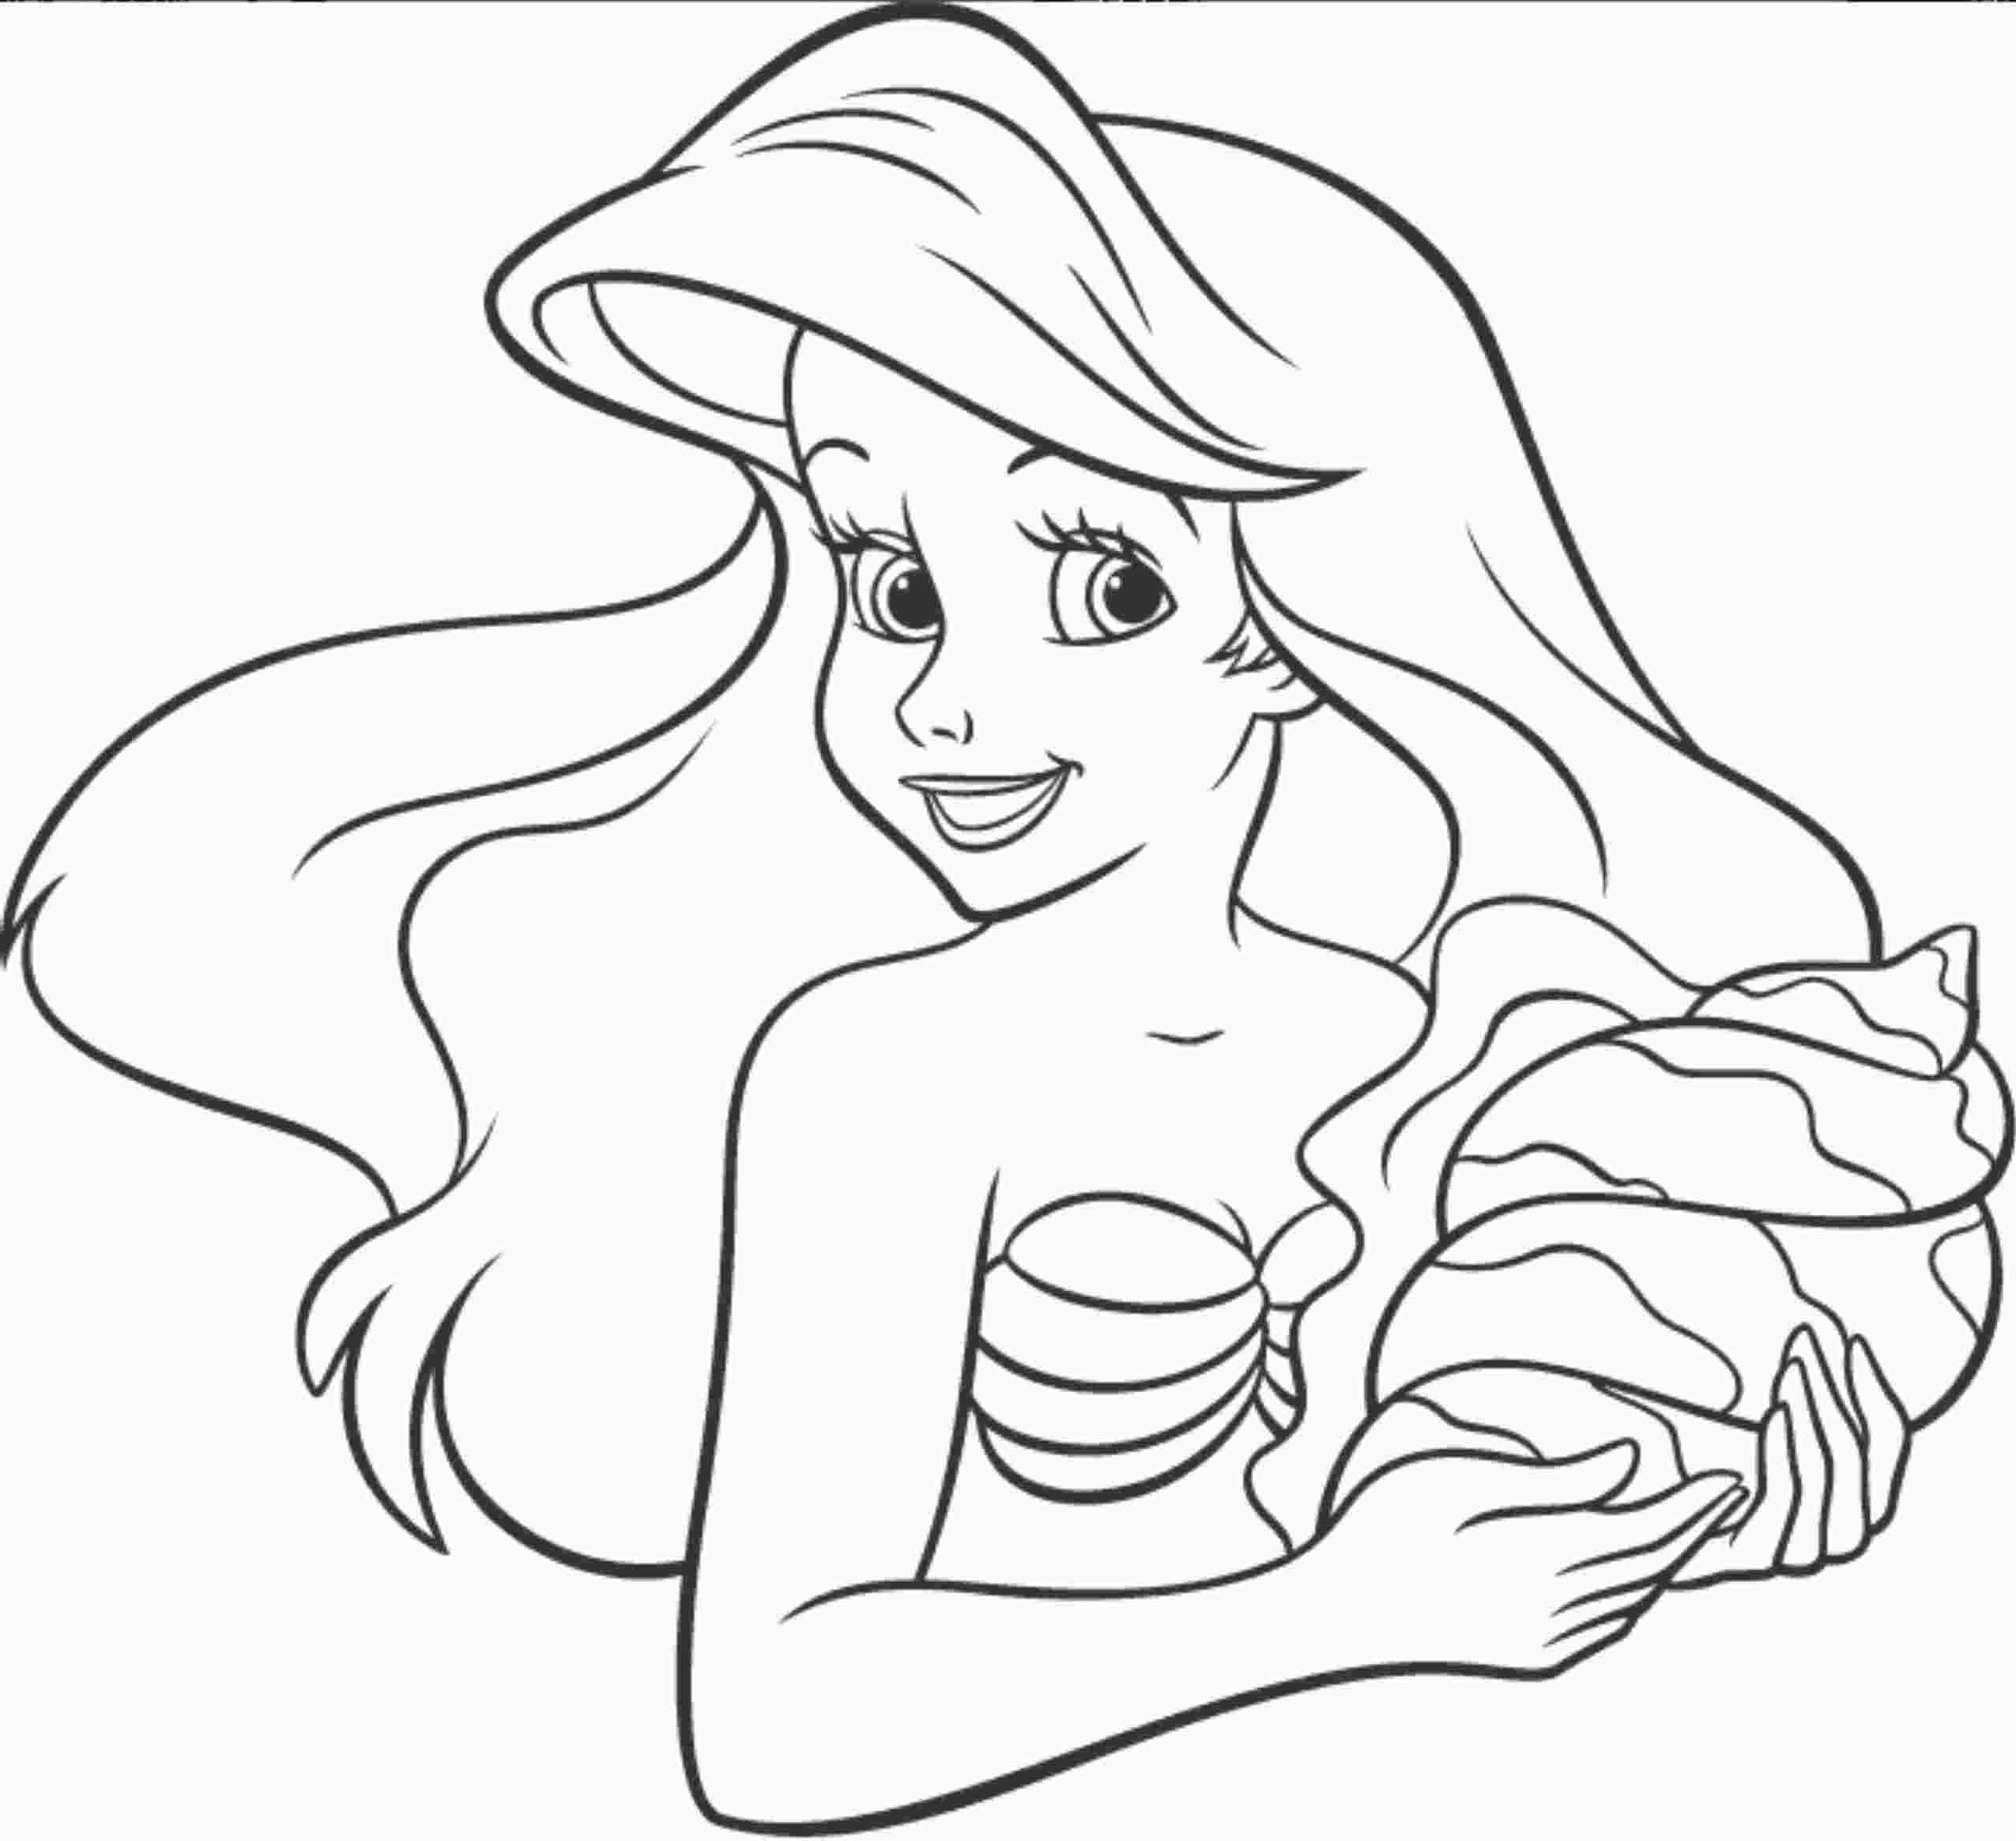 20 Pics Of Little Mermaid Coloring Pages Printable   Little Mermaid ...